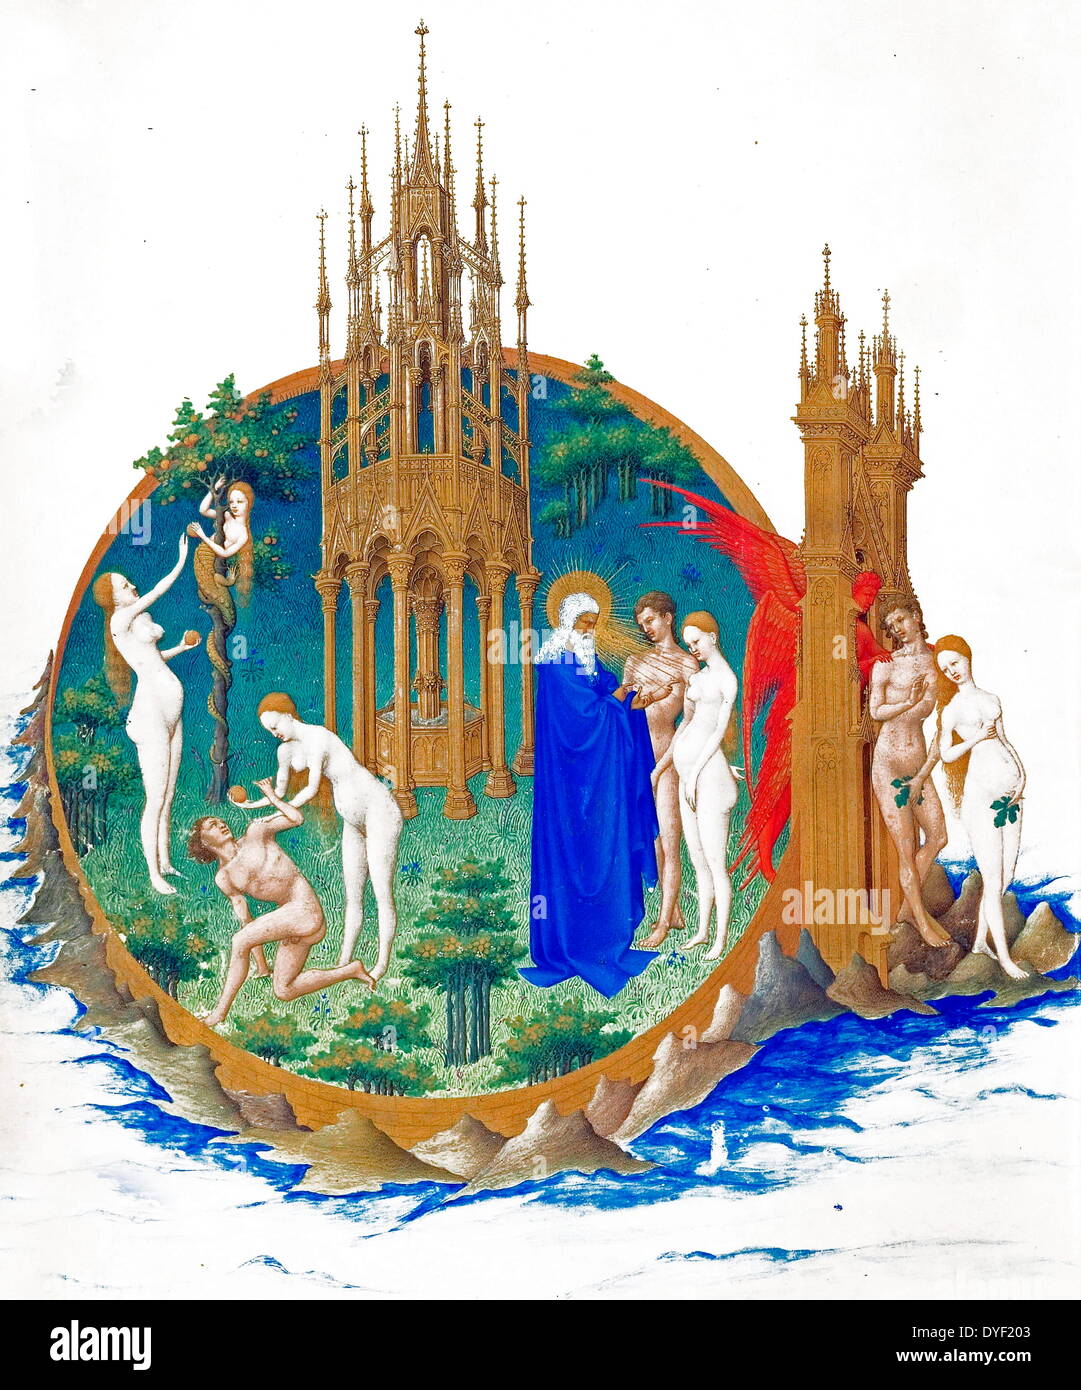 Page from the calendar of the Très Riches Heures showing 'The Garden of Eden'. The Très Riches Heures is a French Gothic manuscript illumination with beautiful illustrations of prayers and canonical scenes from the Bible. Created by the Limbourg brothers between 1412-1416. Tempera on vellum. Stock Photo